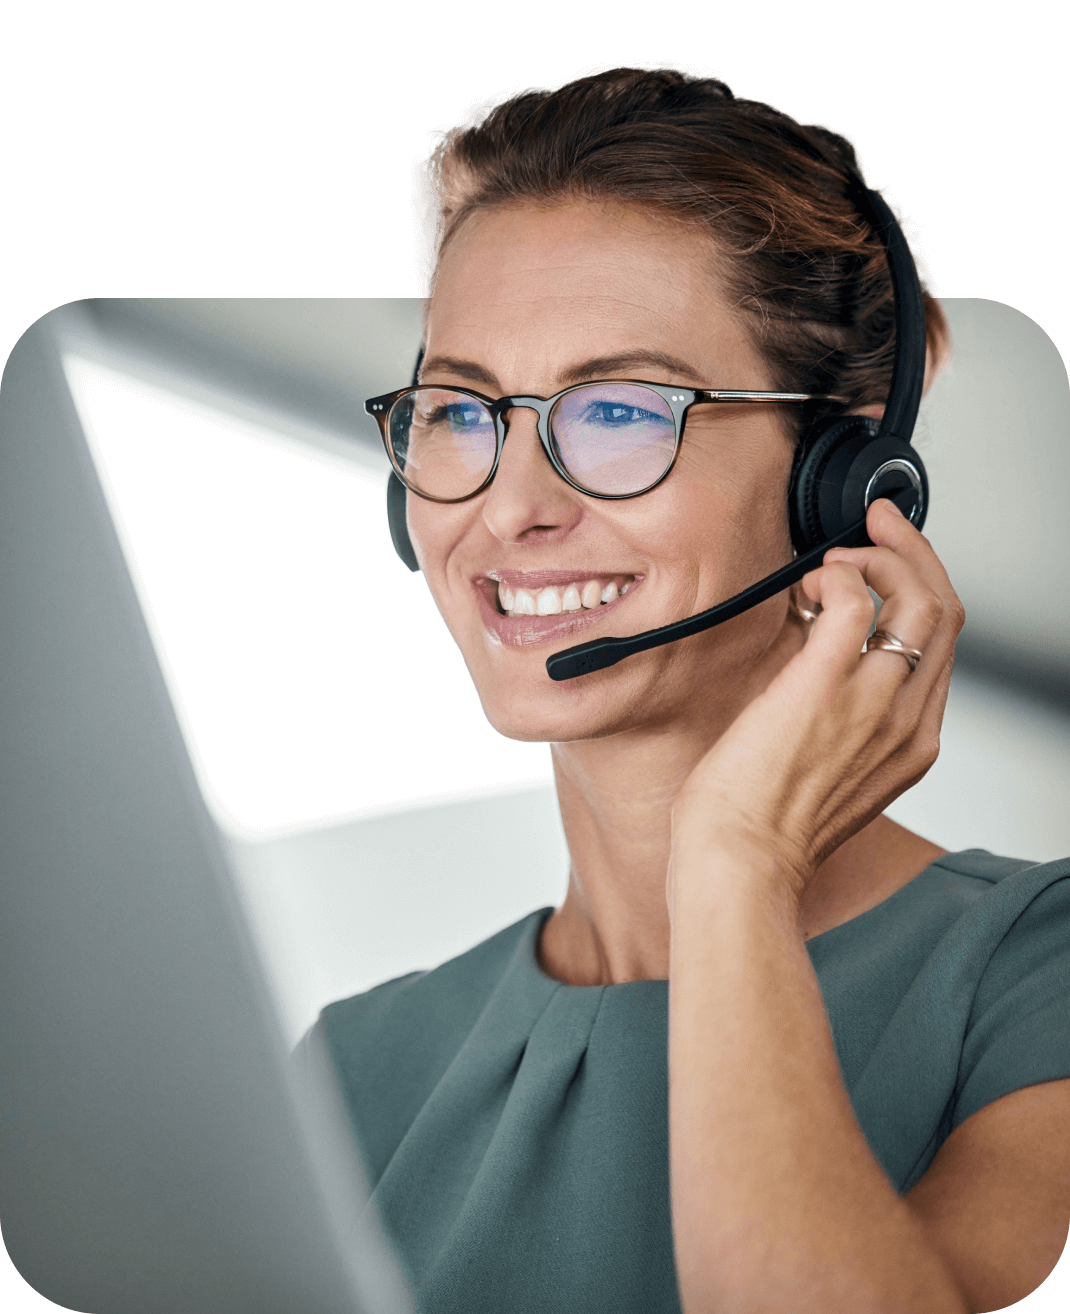 Female contact center employee smiling with her headset on